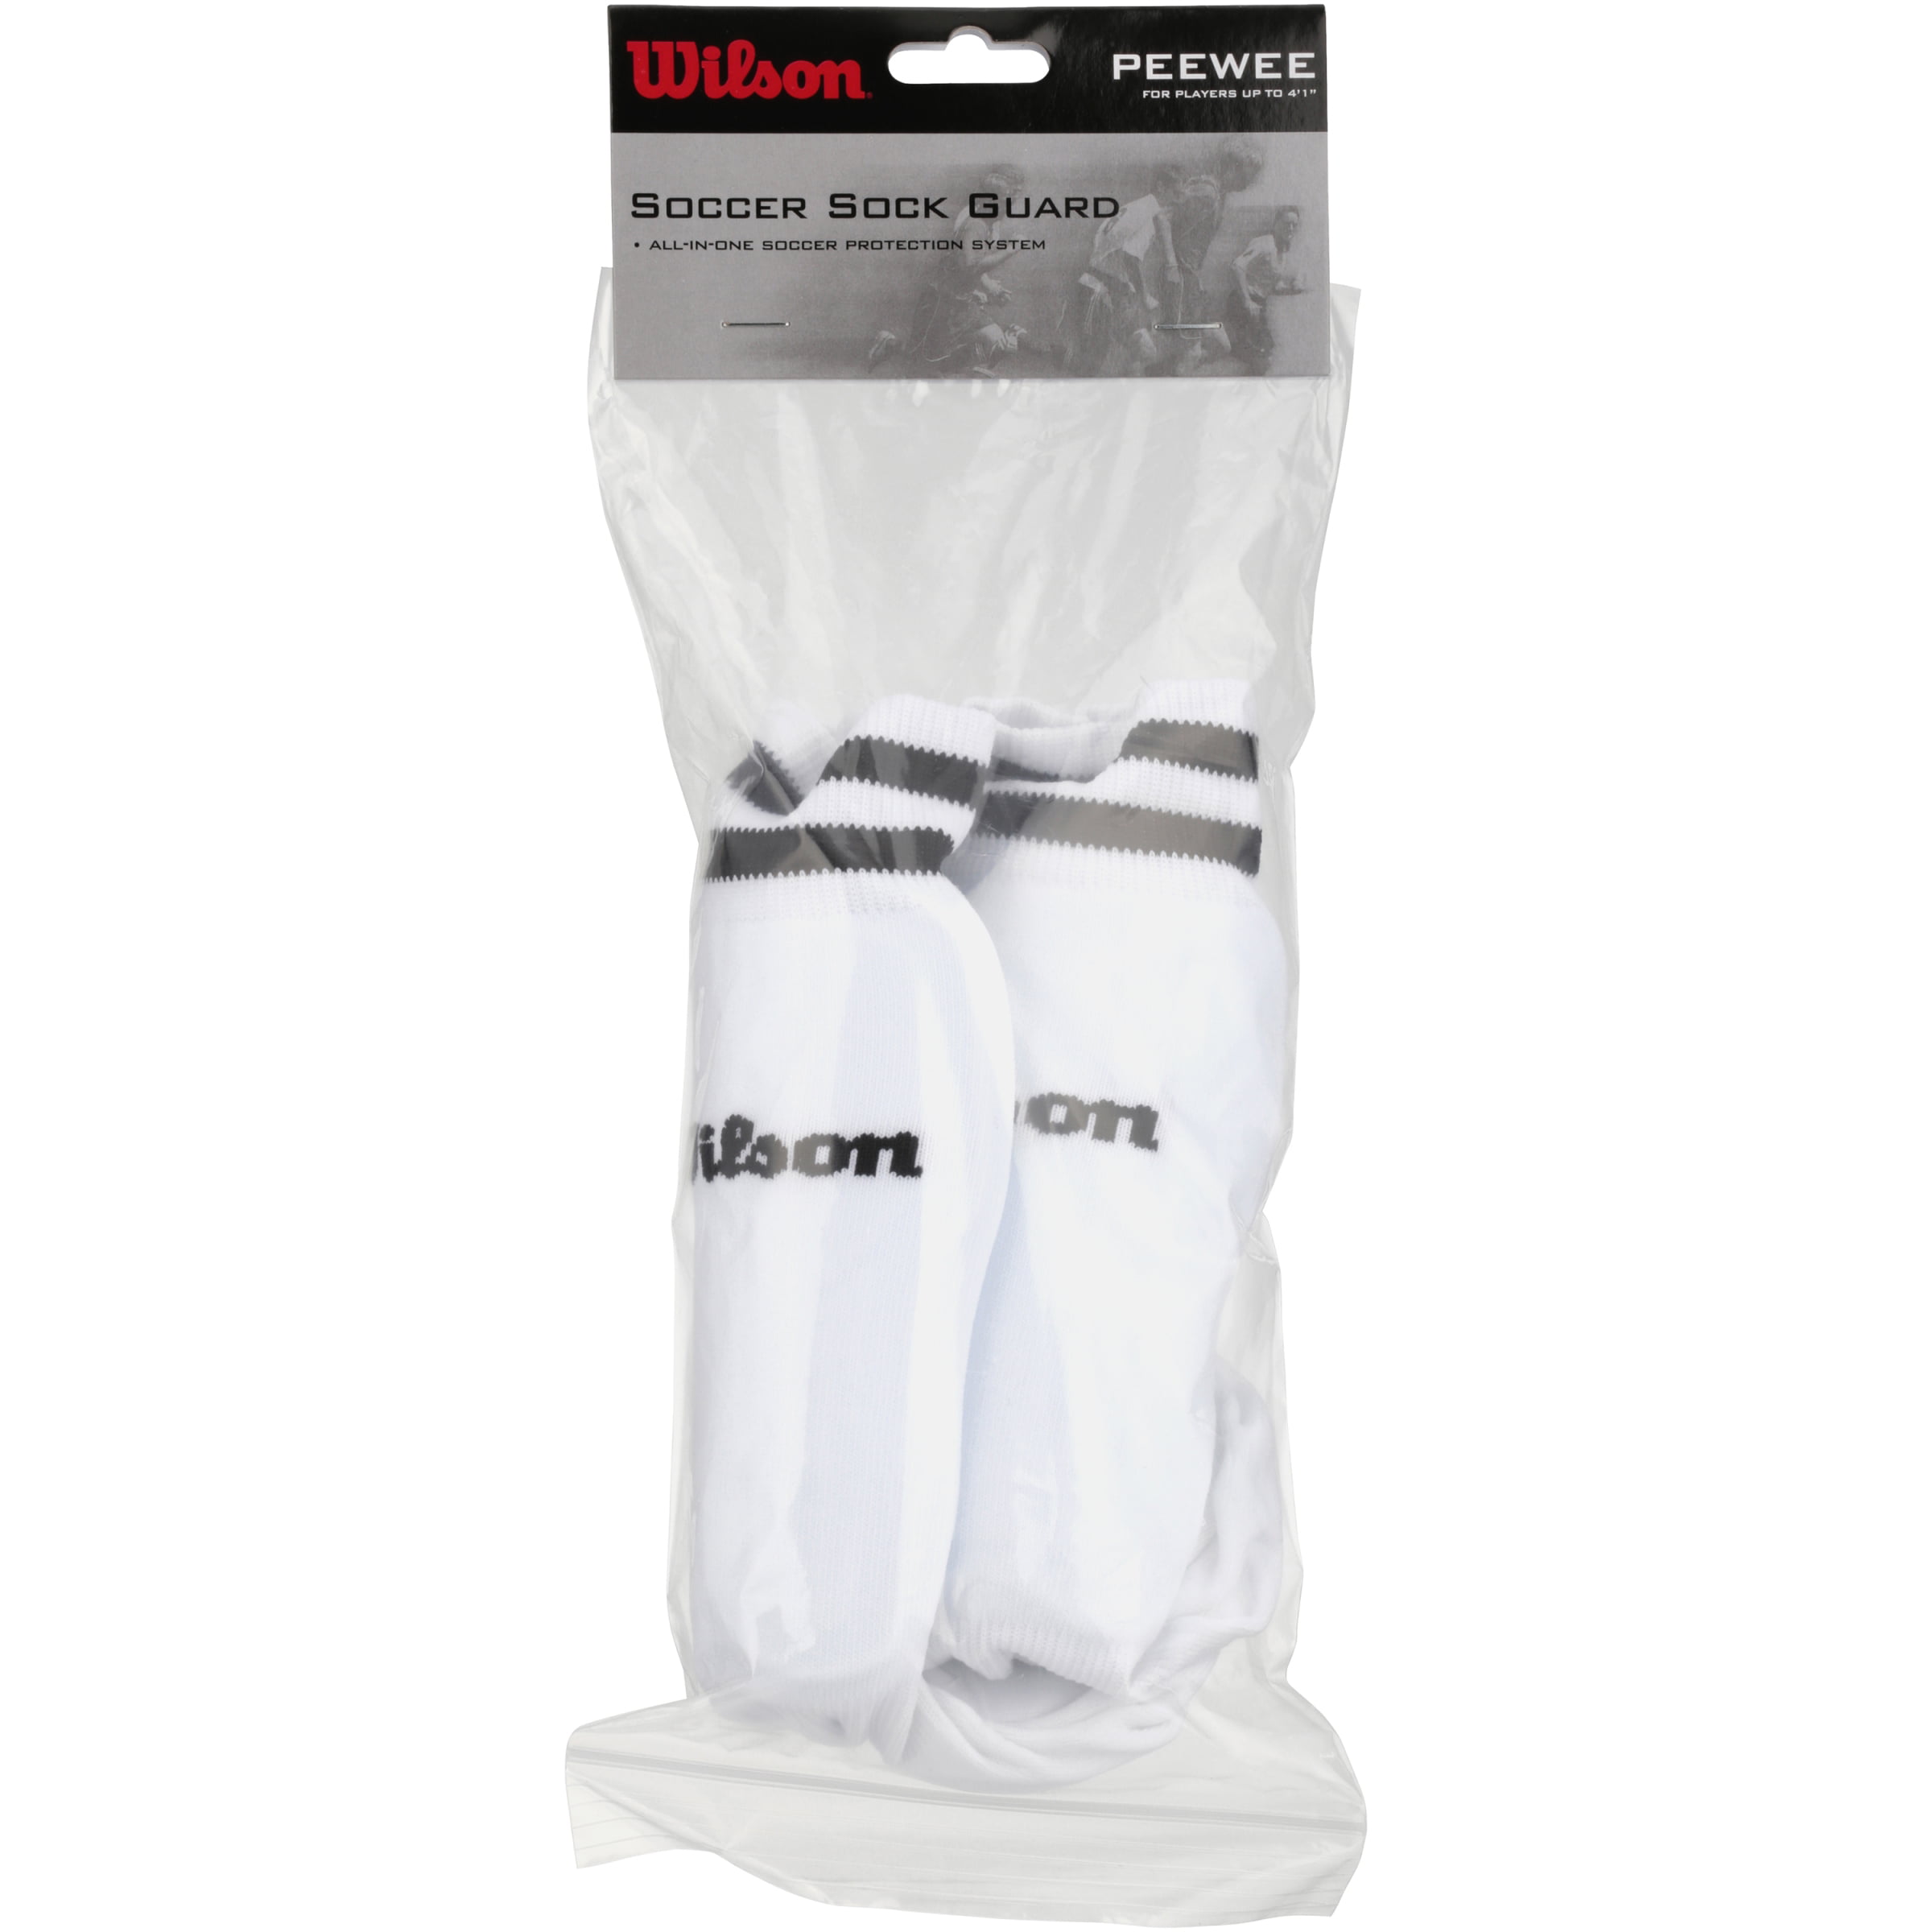 2 Packs Wilson PeeWee Up To 4'1" All In One Soccer Sock Guard Protection System 